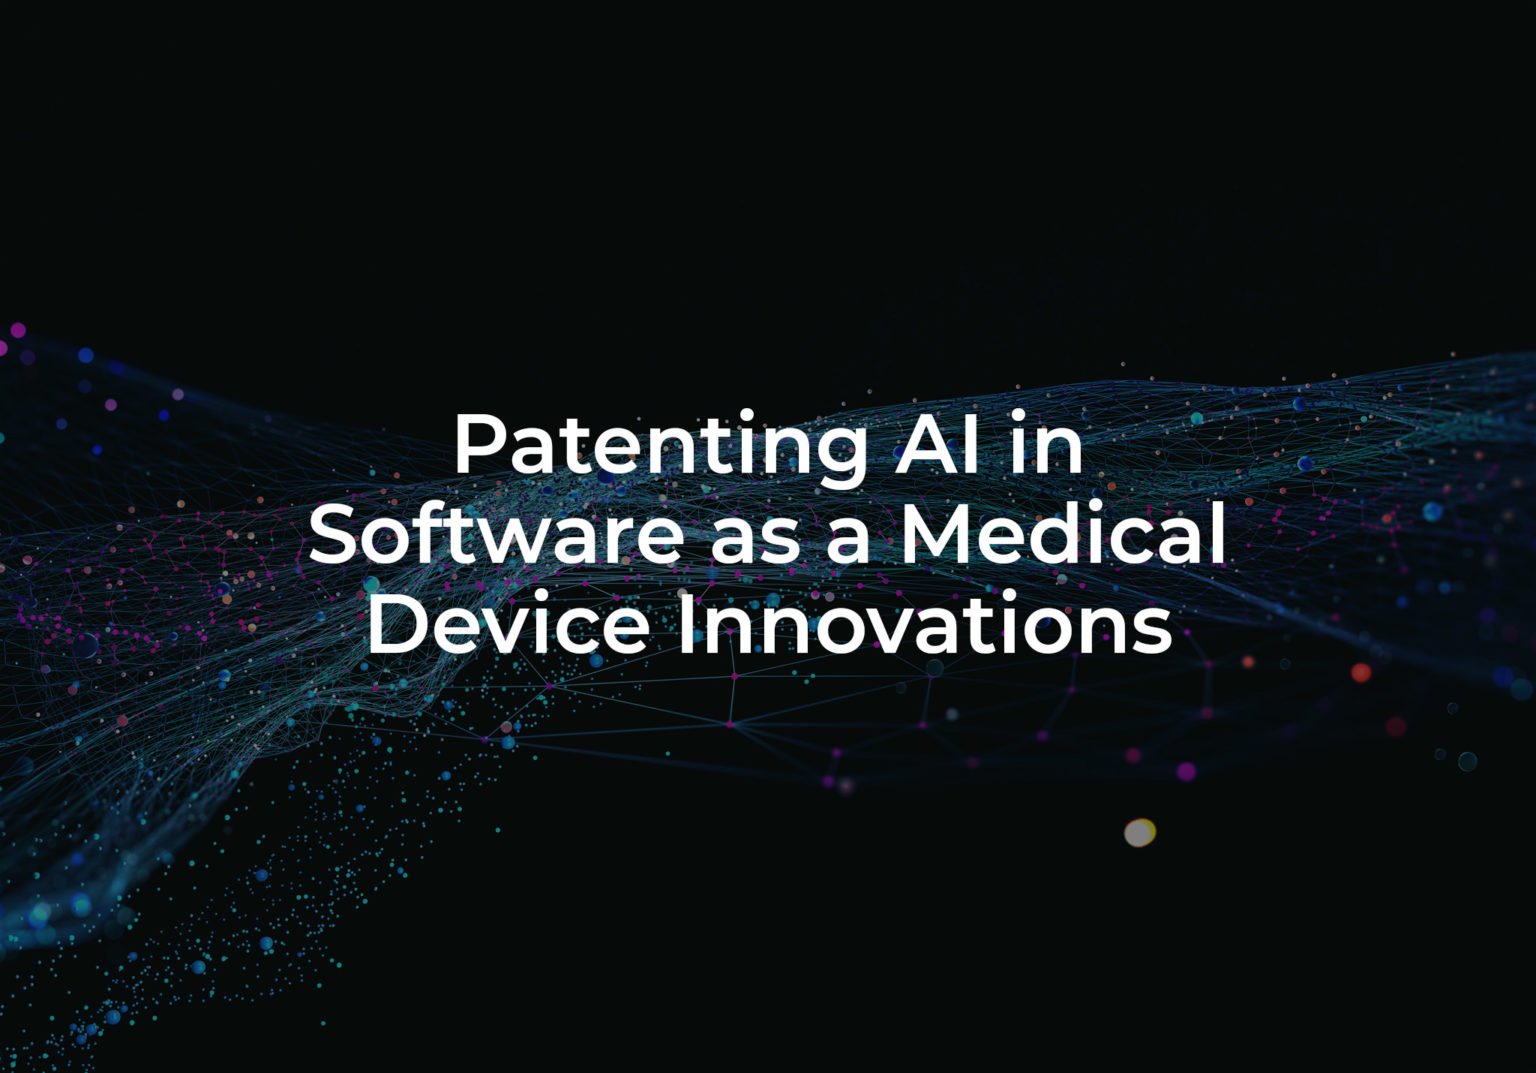 Patenting AI Software in Medical Device Inventions